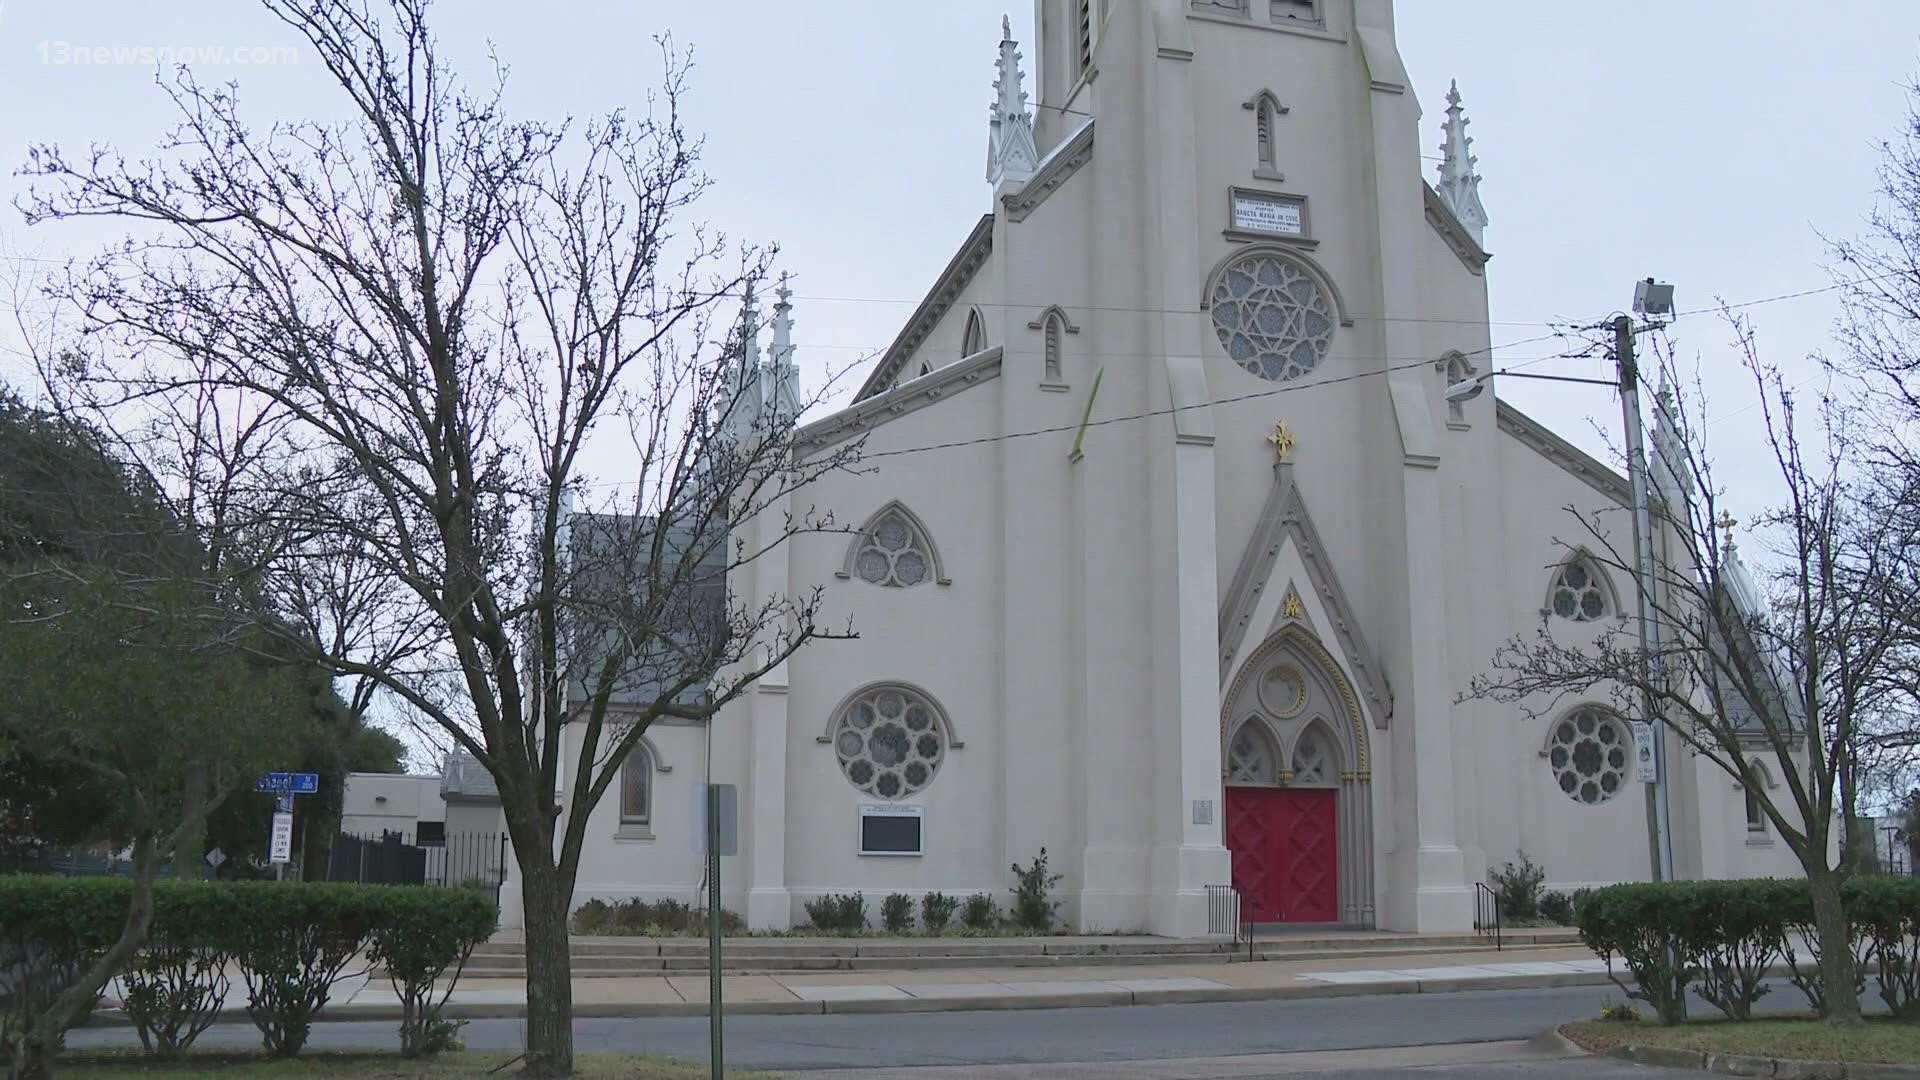 Basilica of St. Mary of the Immaculate Conception is one of 35 historically Black churches across the country receiving a total of $4,000,000.